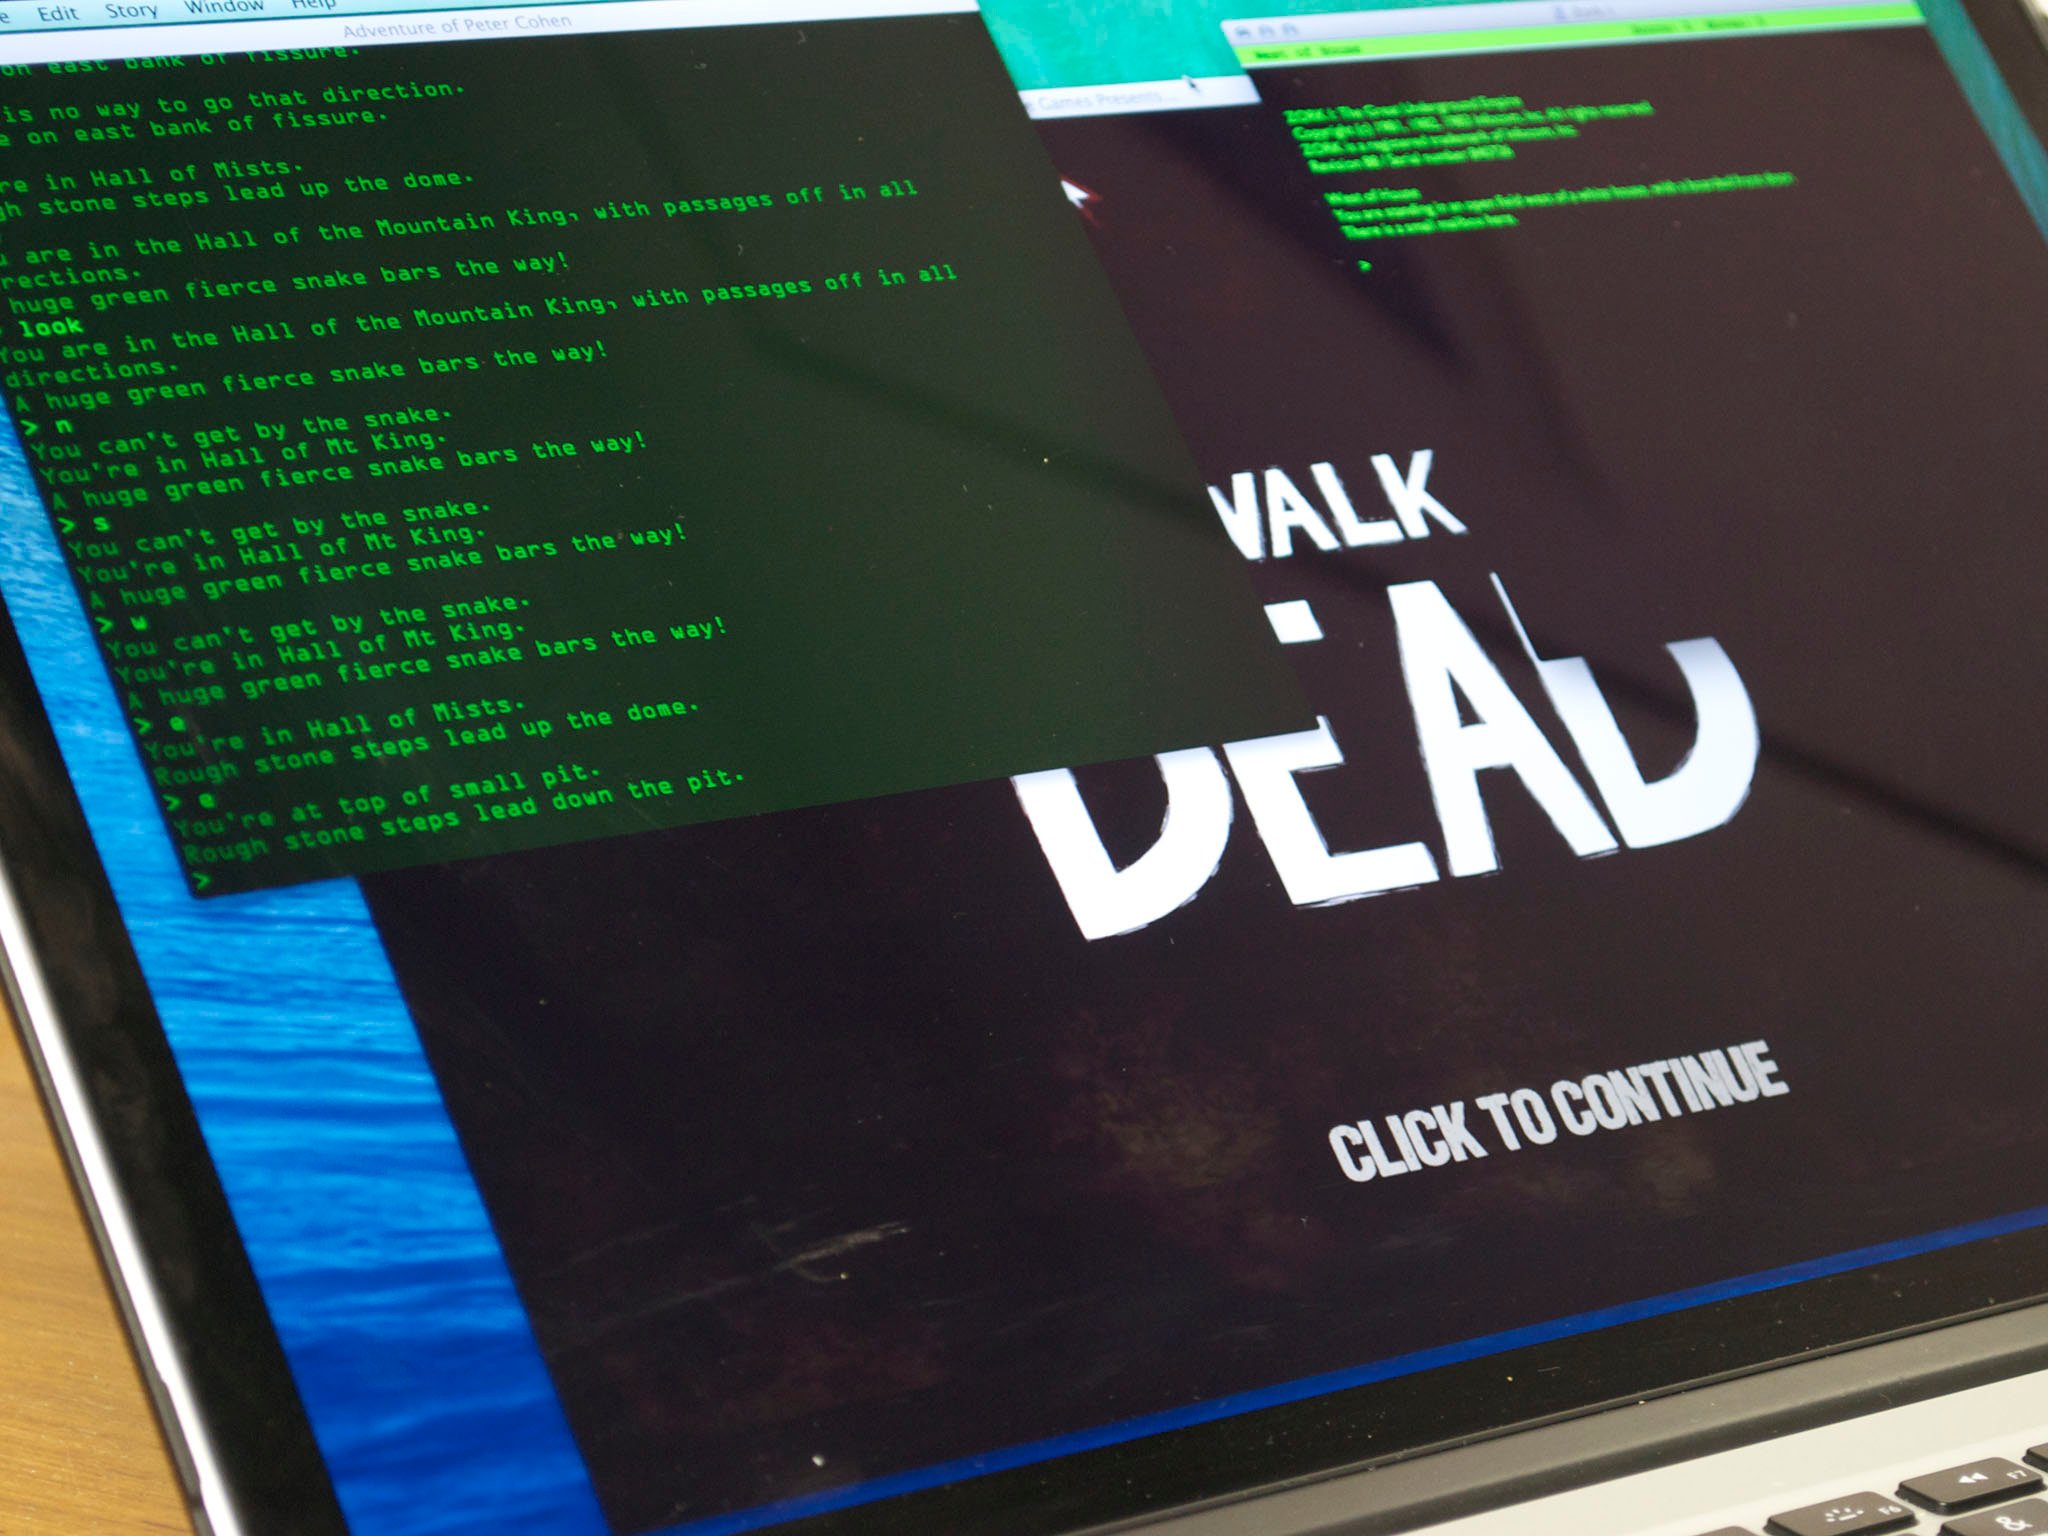 From Colossal Cave to The Walking Dead: The legacy of Interactive Fiction